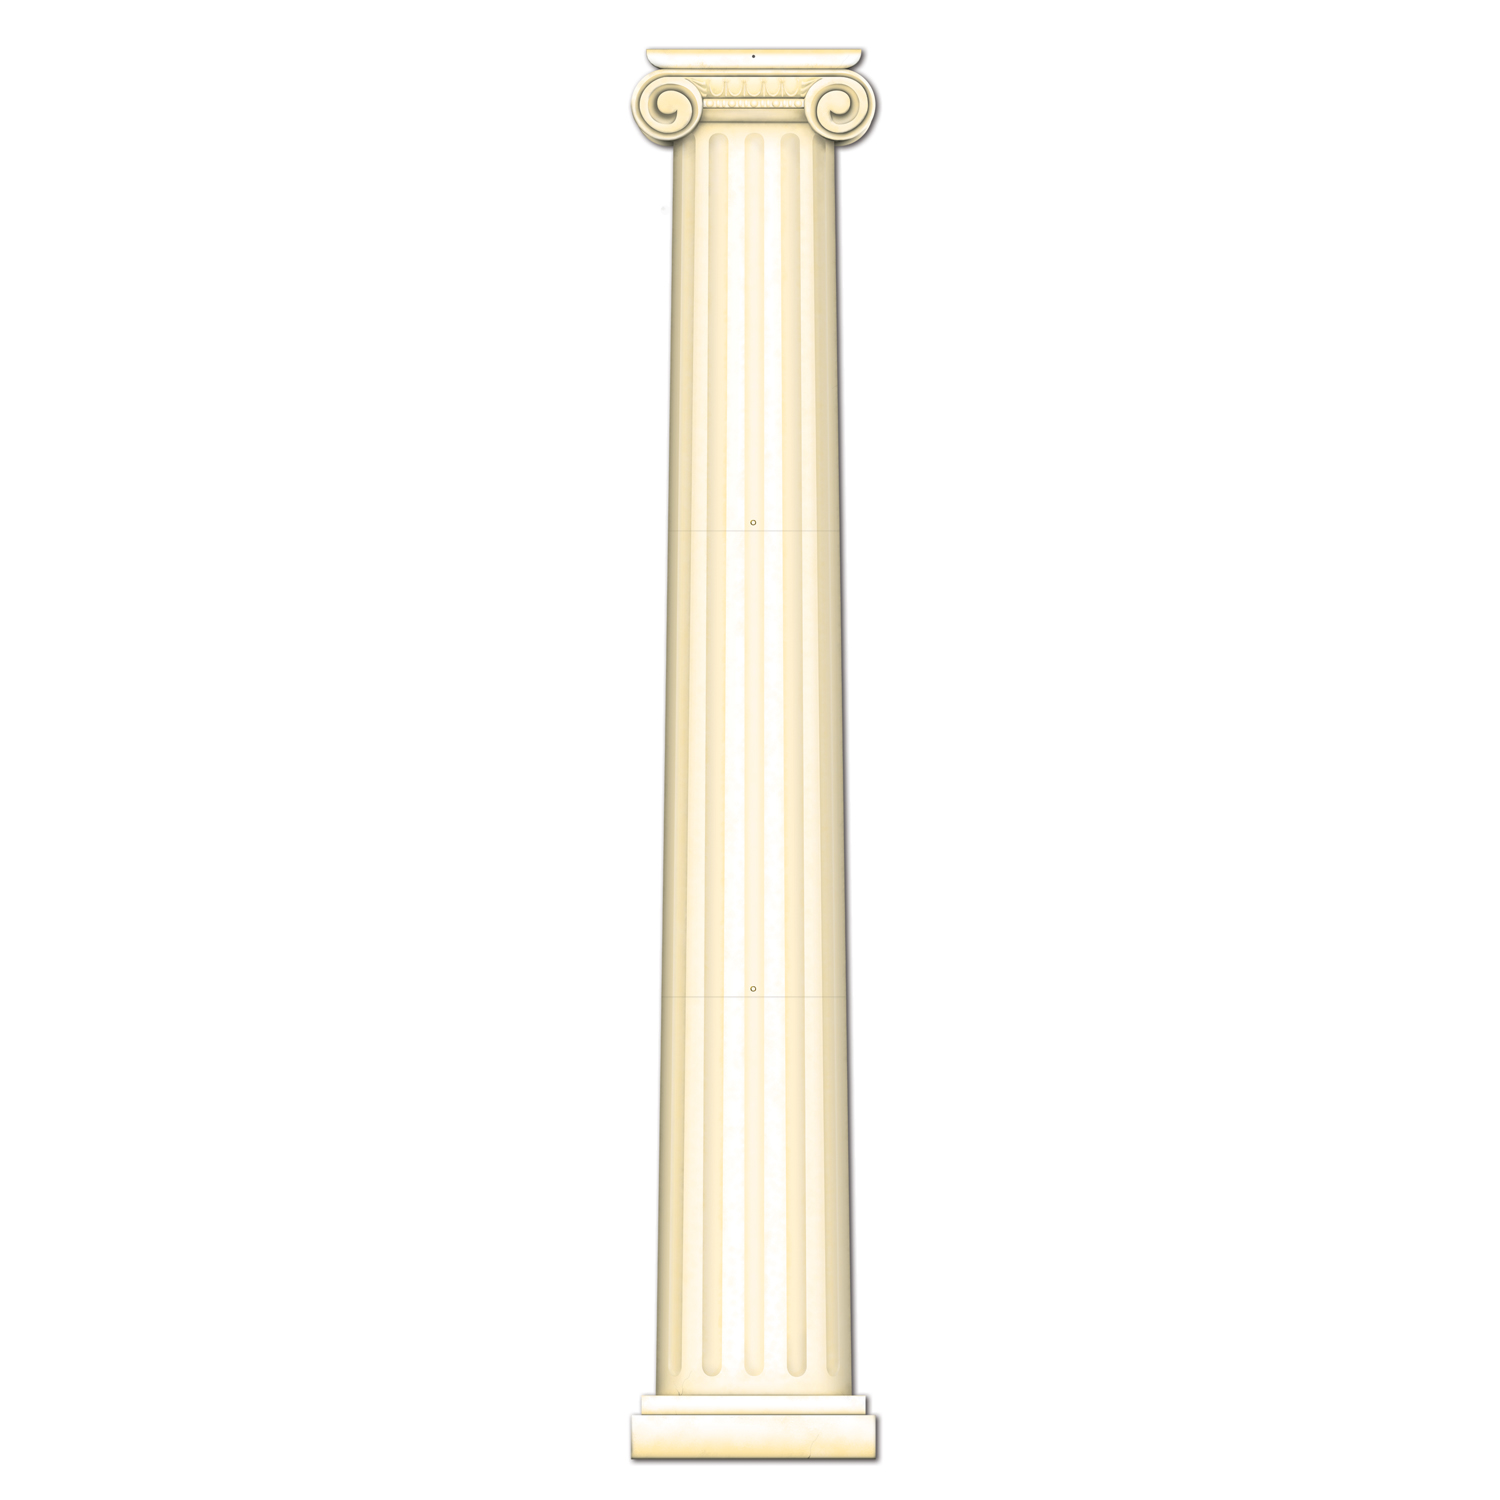 12 Pieces of Jointed Column Pull-Down Cutout